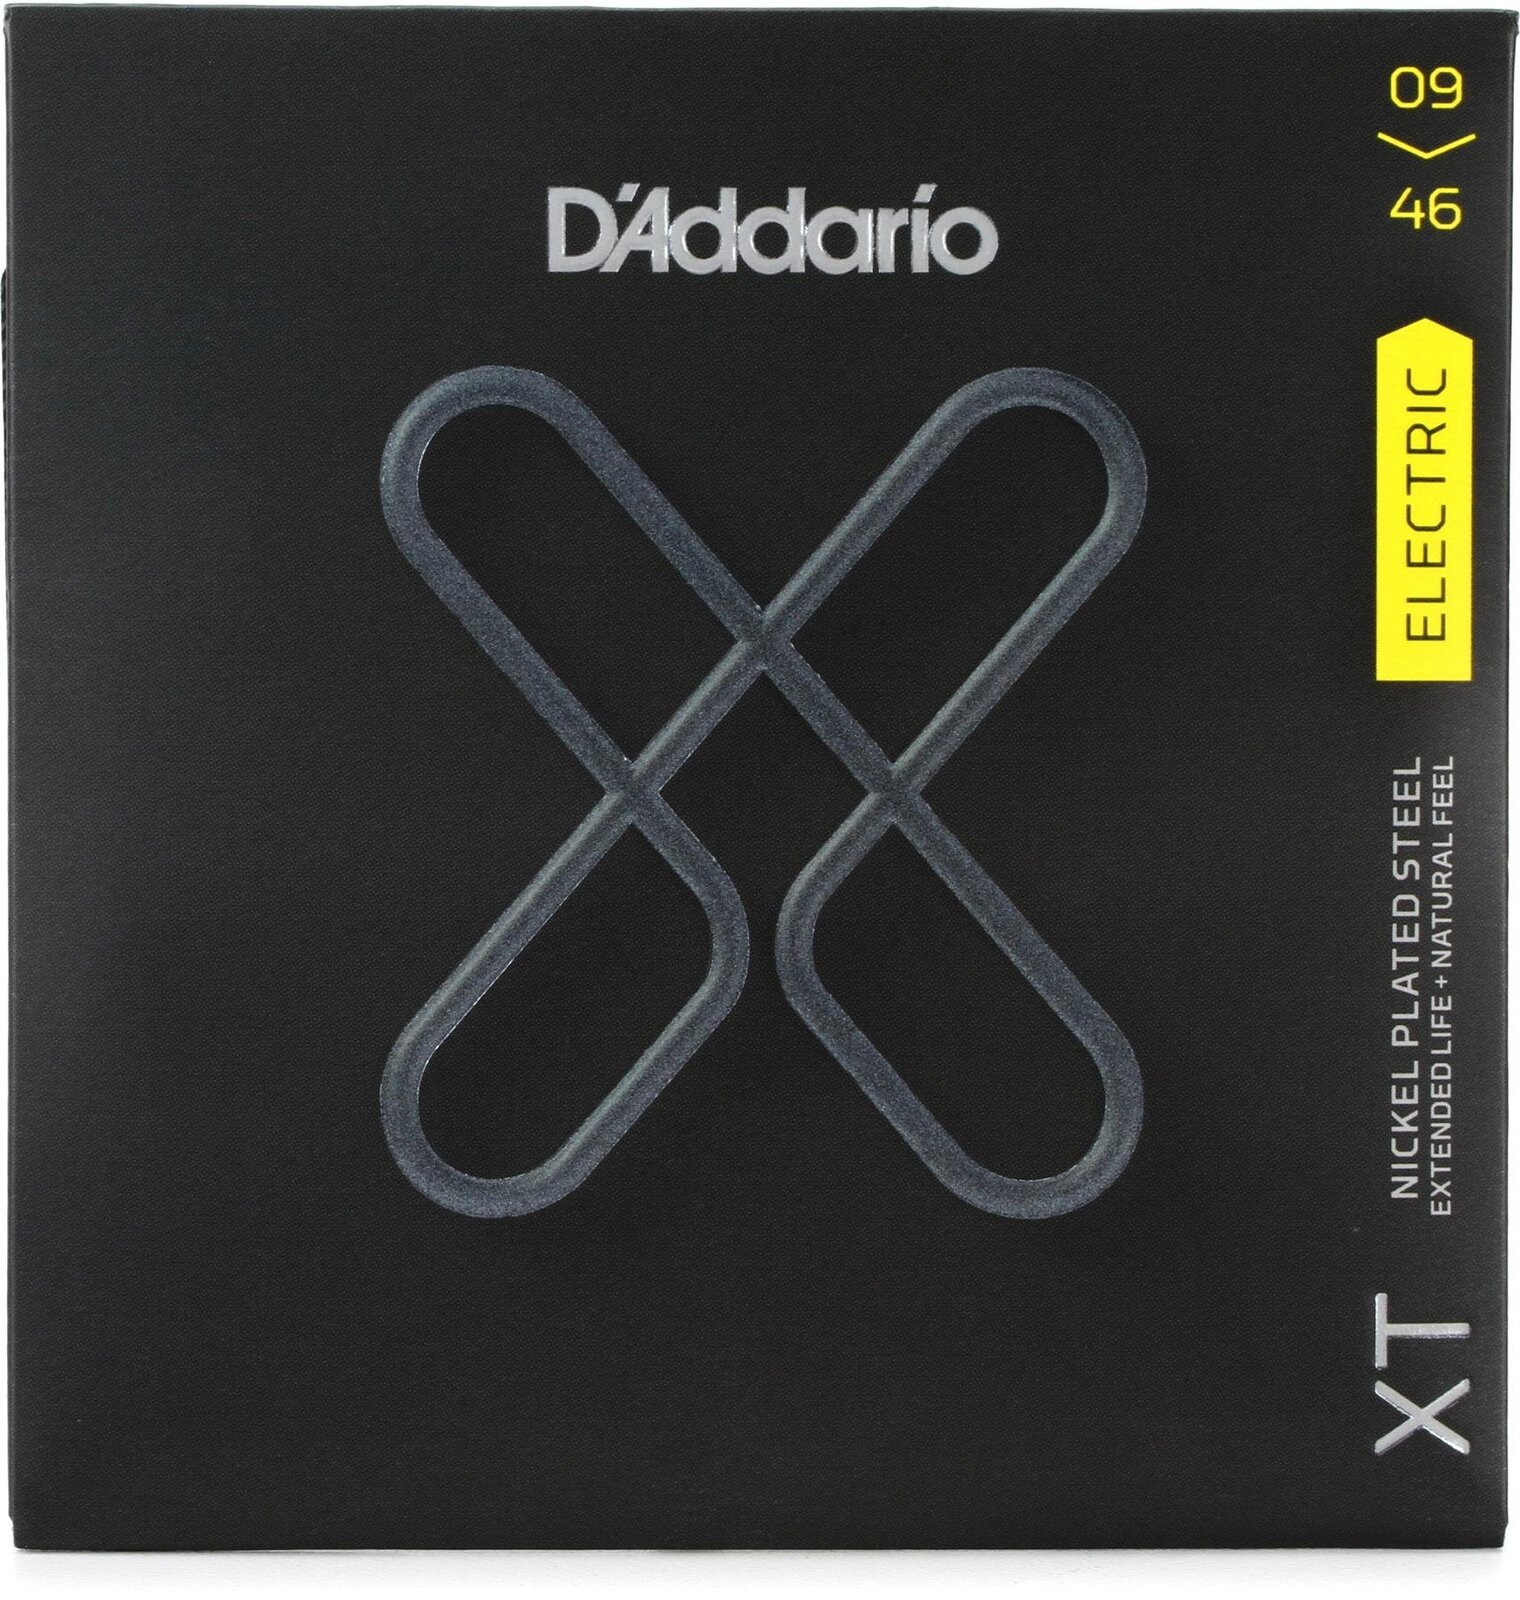 D'Addario XT 09-46 Electric Strings, Extended Life